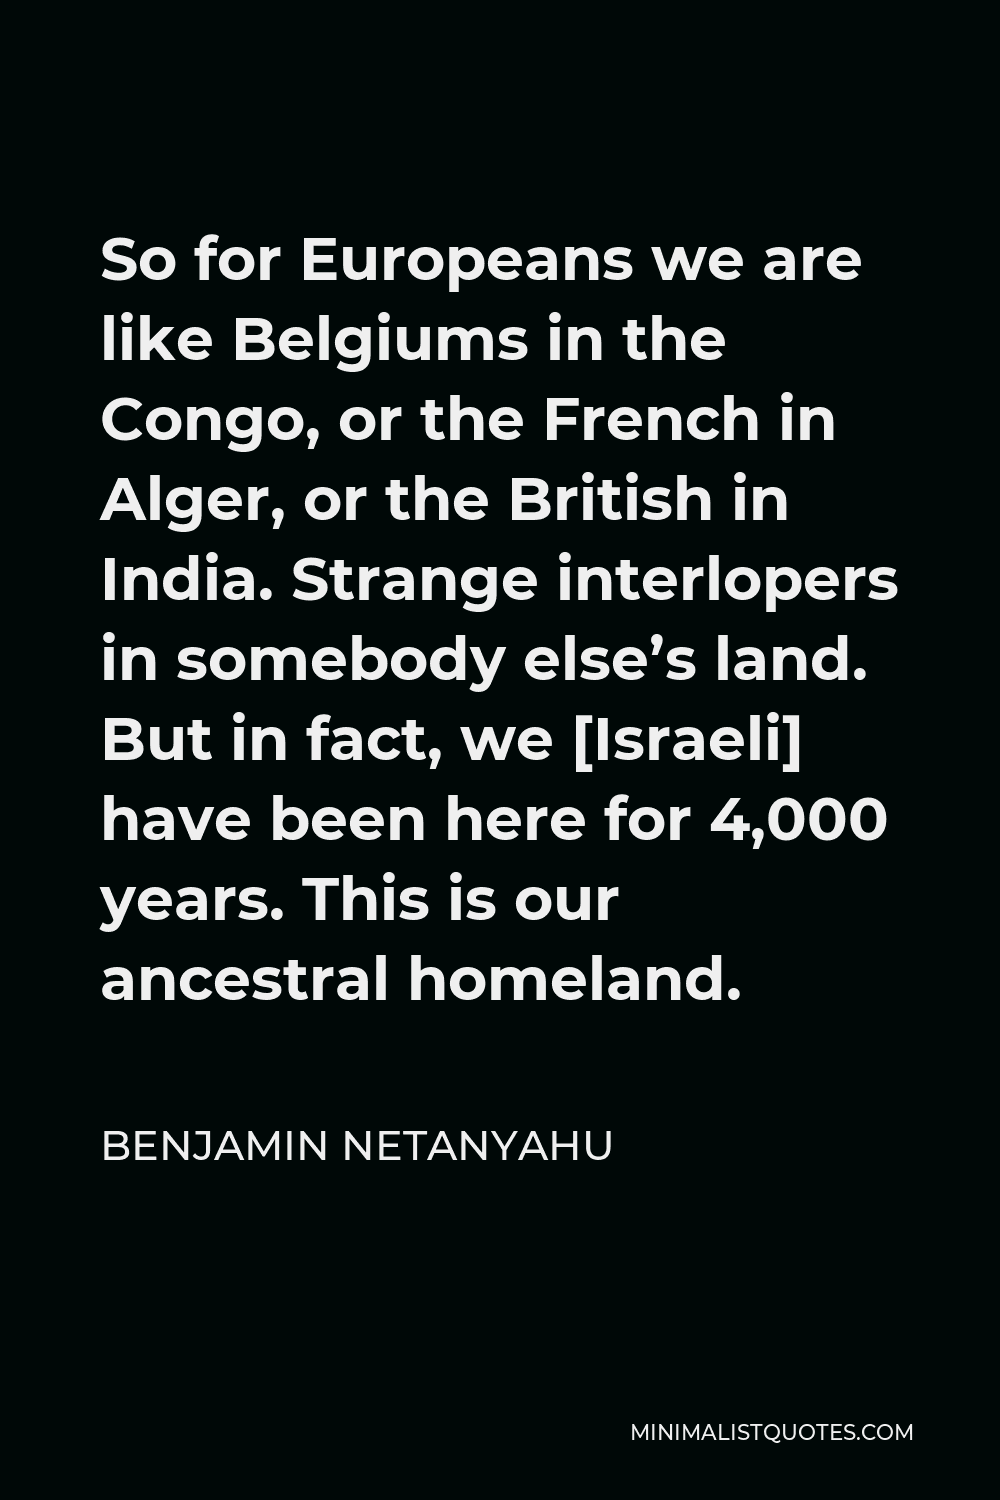 Benjamin Netanyahu Quote - So for Europeans we are like Belgiums in the Congo, or the French in Alger, or the British in India. Strange interlopers in somebody else’s land. But in fact, we [Israeli] have been here for 4,000 years. This is our ancestral homeland.